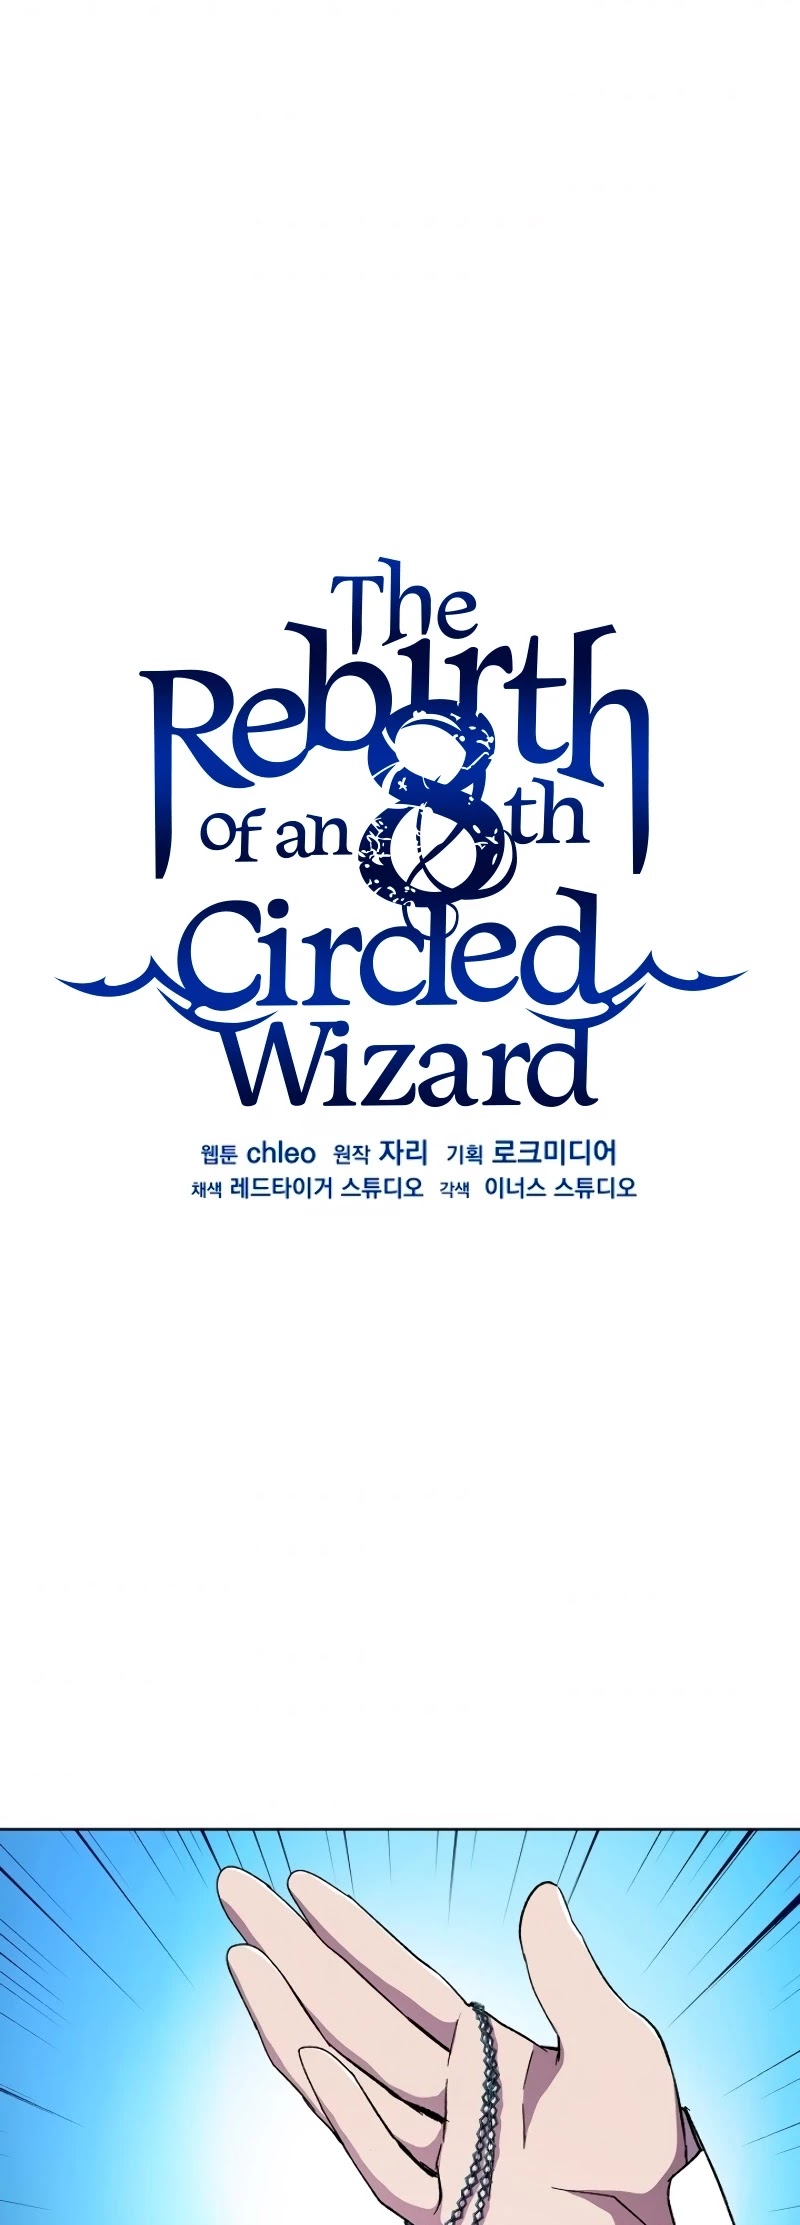 The Rebirth Of An 8Th Circled Wizard Chapter 58